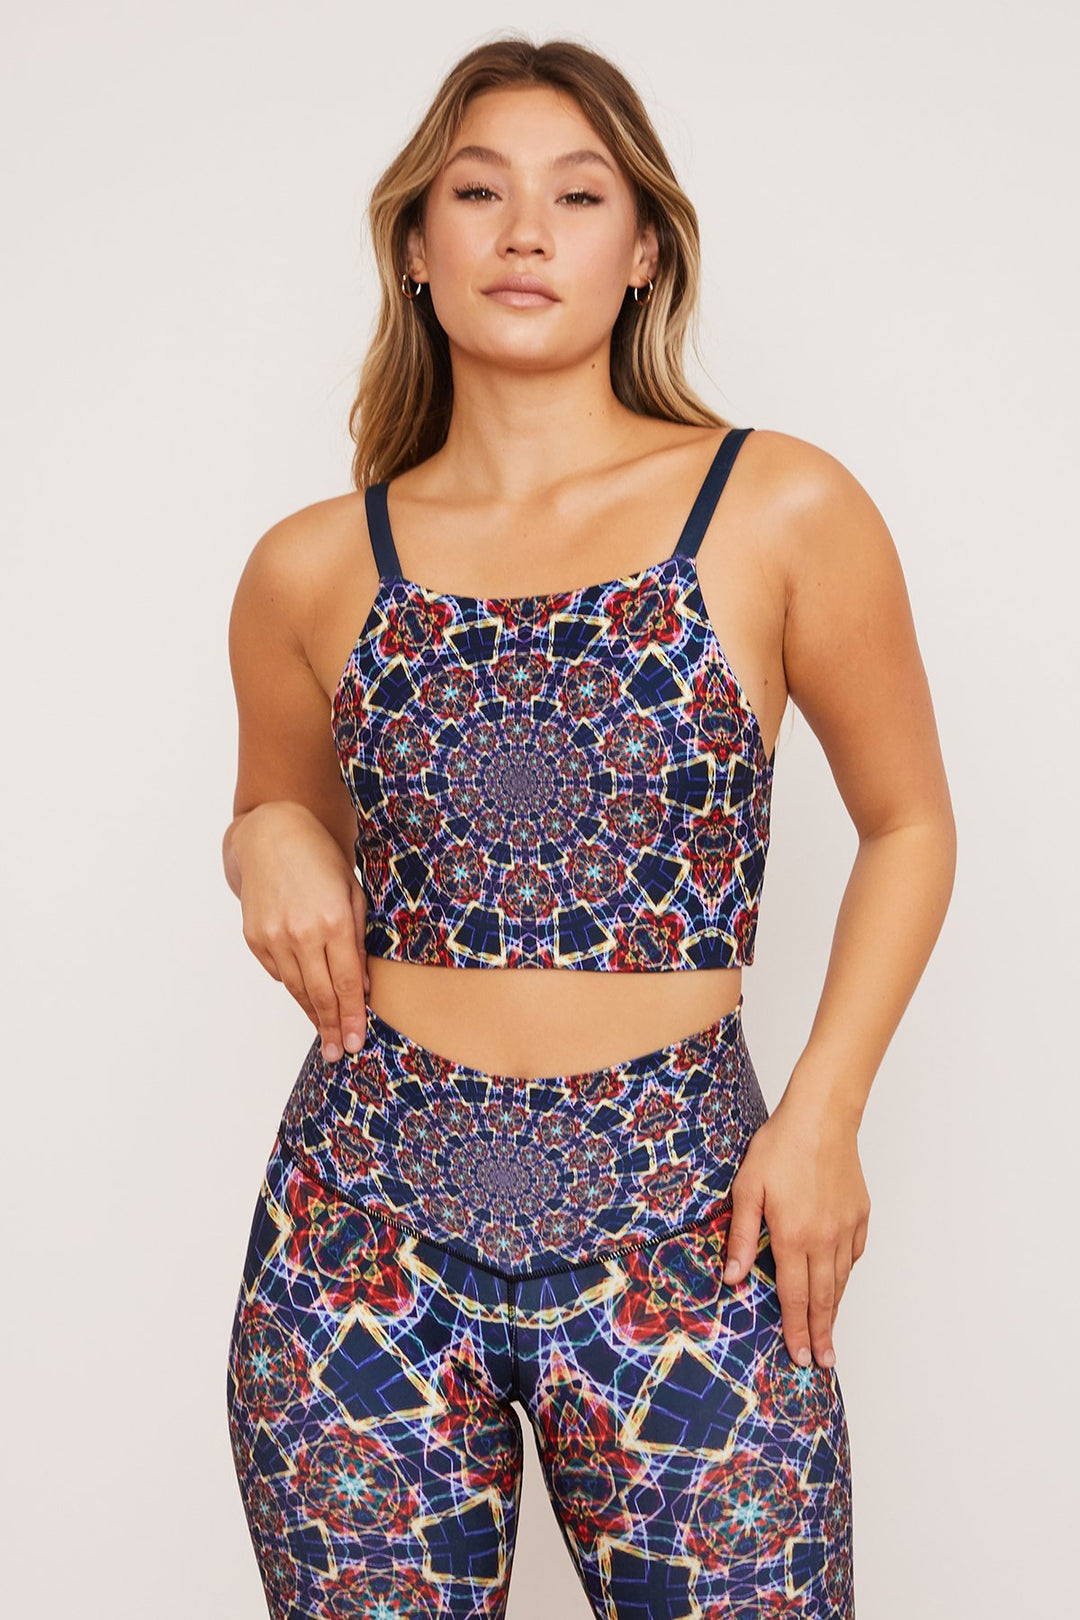 Moonlight Mandala Reversible Four-Way Top By Wolven